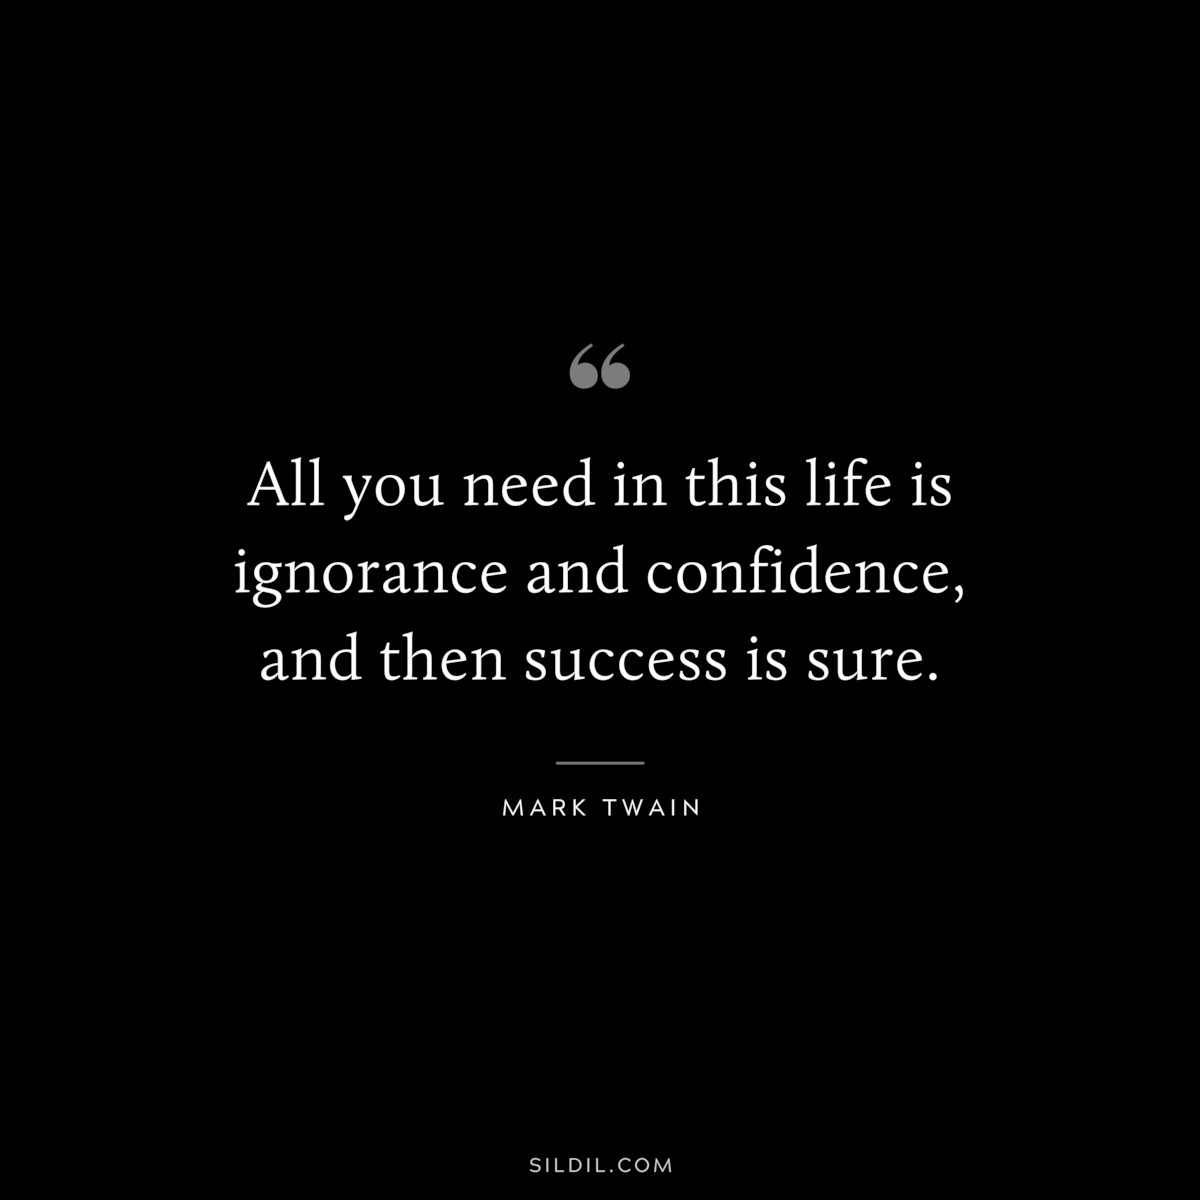 All you need in this life is ignorance and confidence, and then success is sure. ― Mark Twain